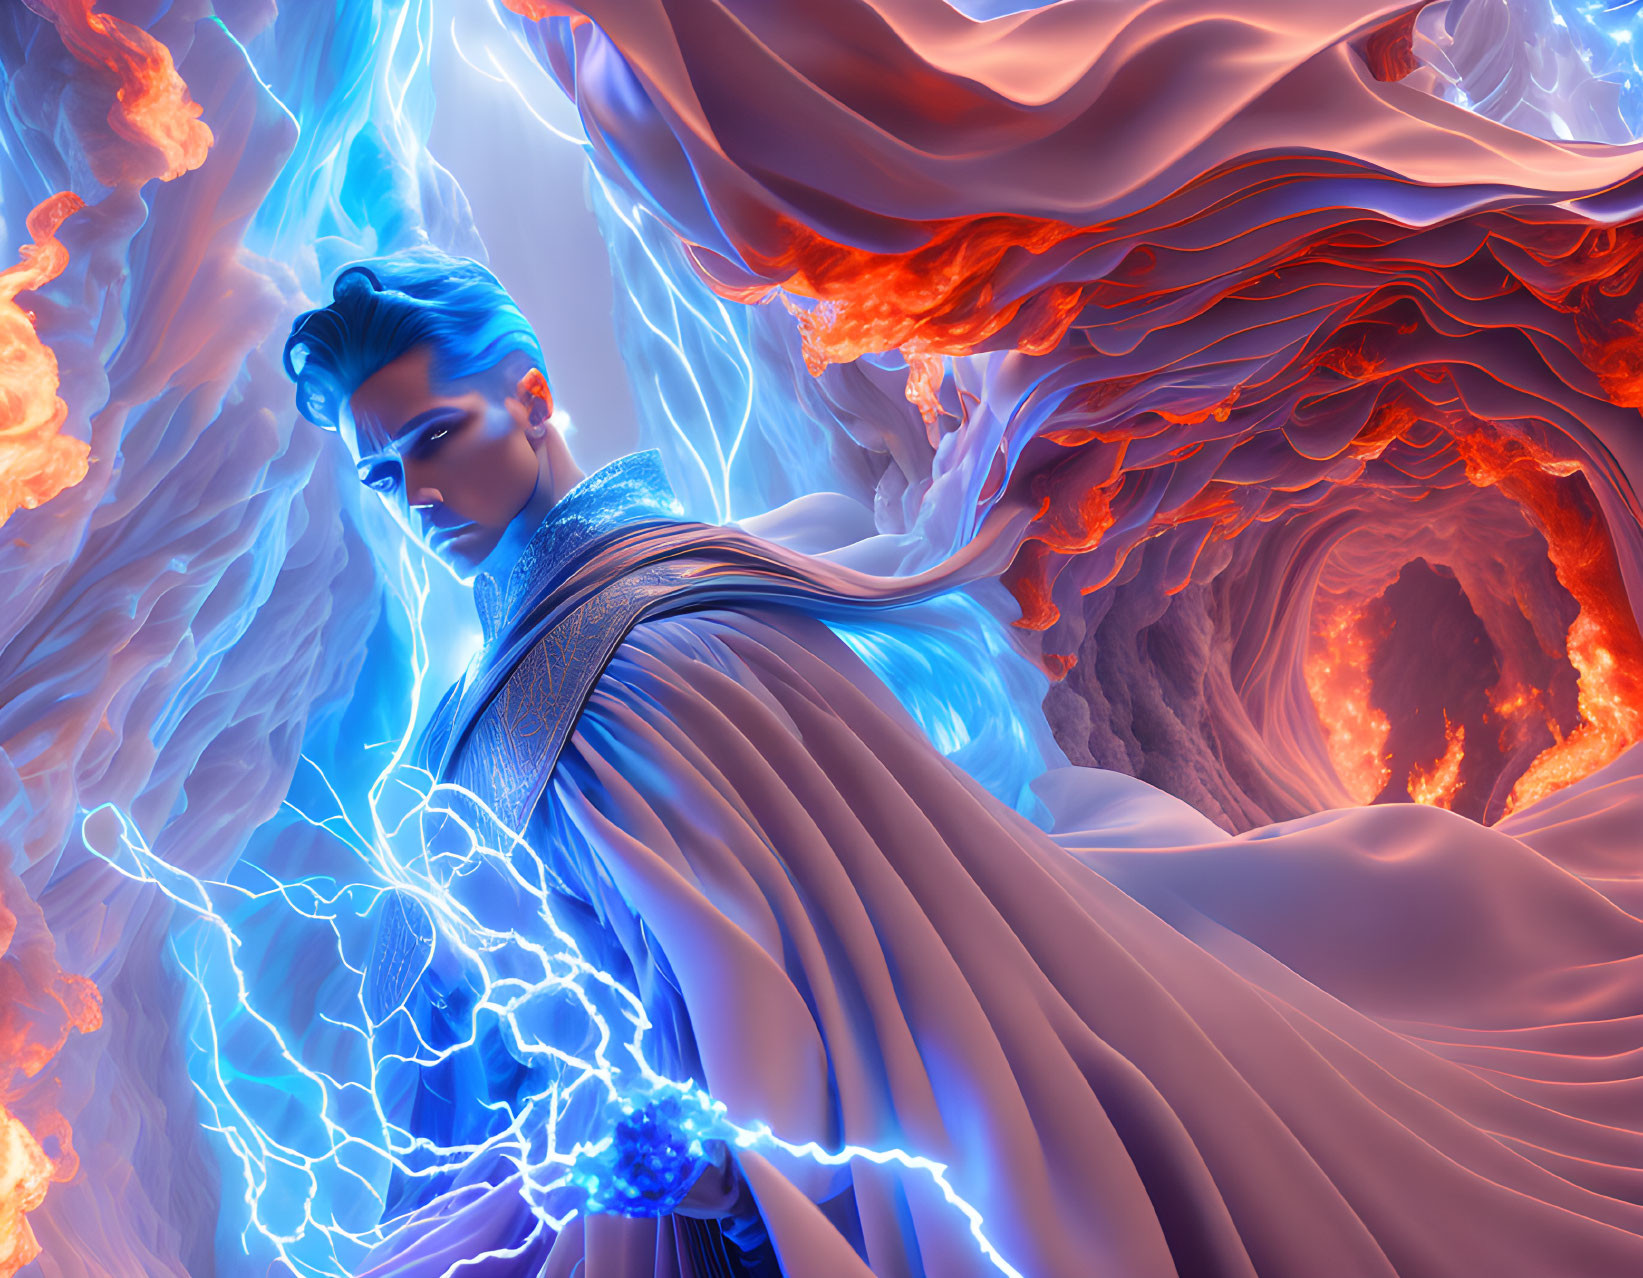 Person with Blue Skin and Hair in Flowing Cape Surrounded by Dynamic Energy Patterns